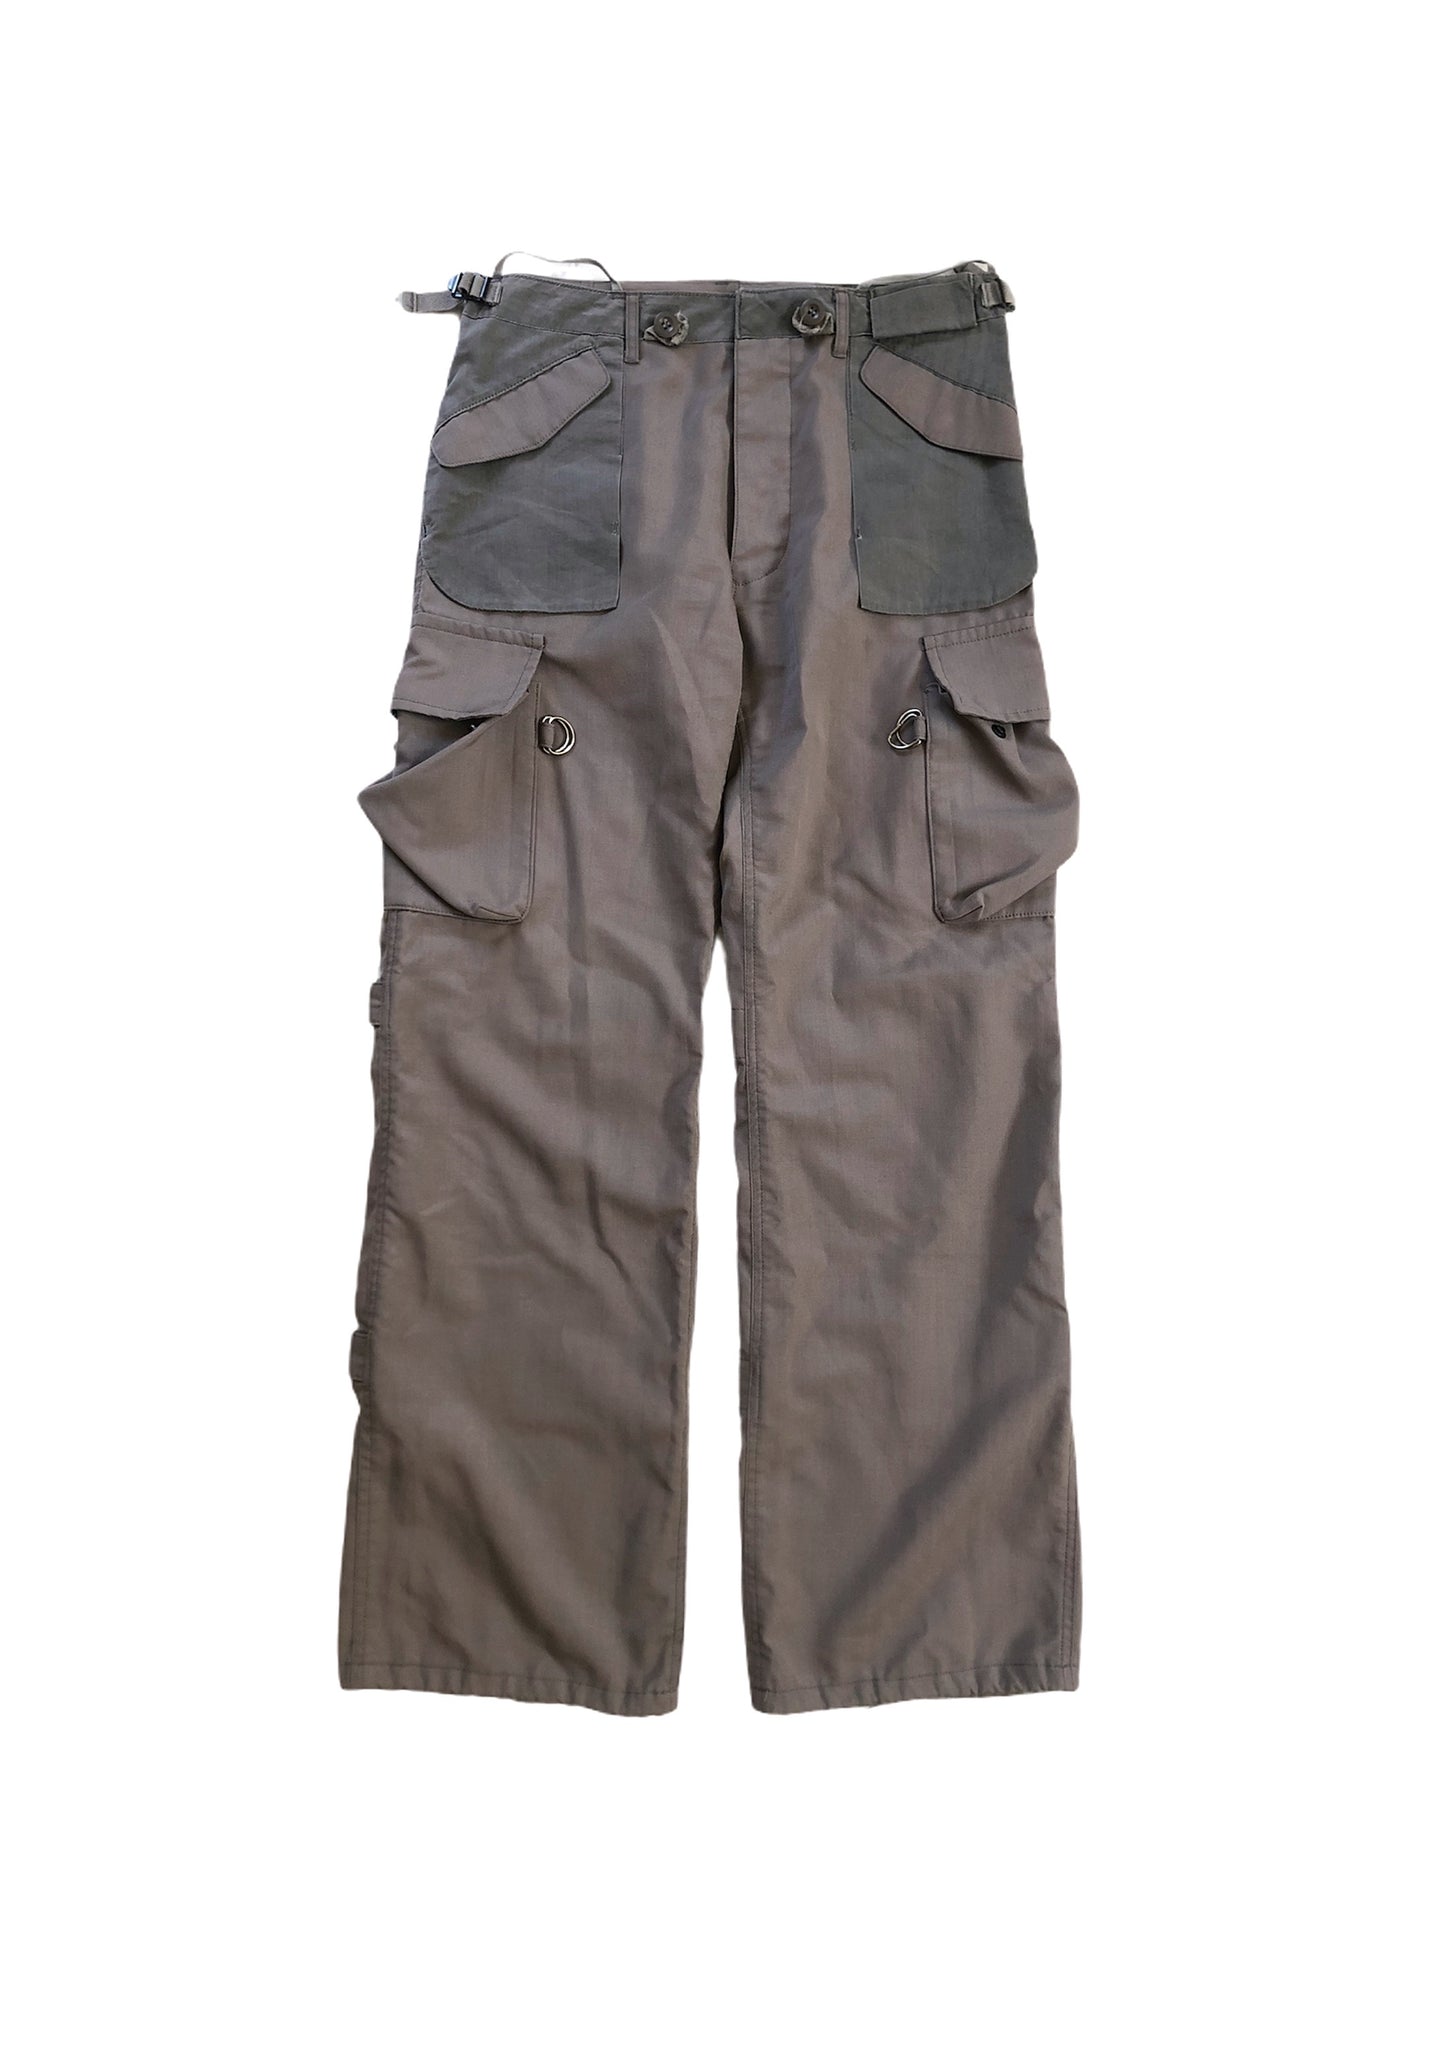 Reconstructed Cargos Pants